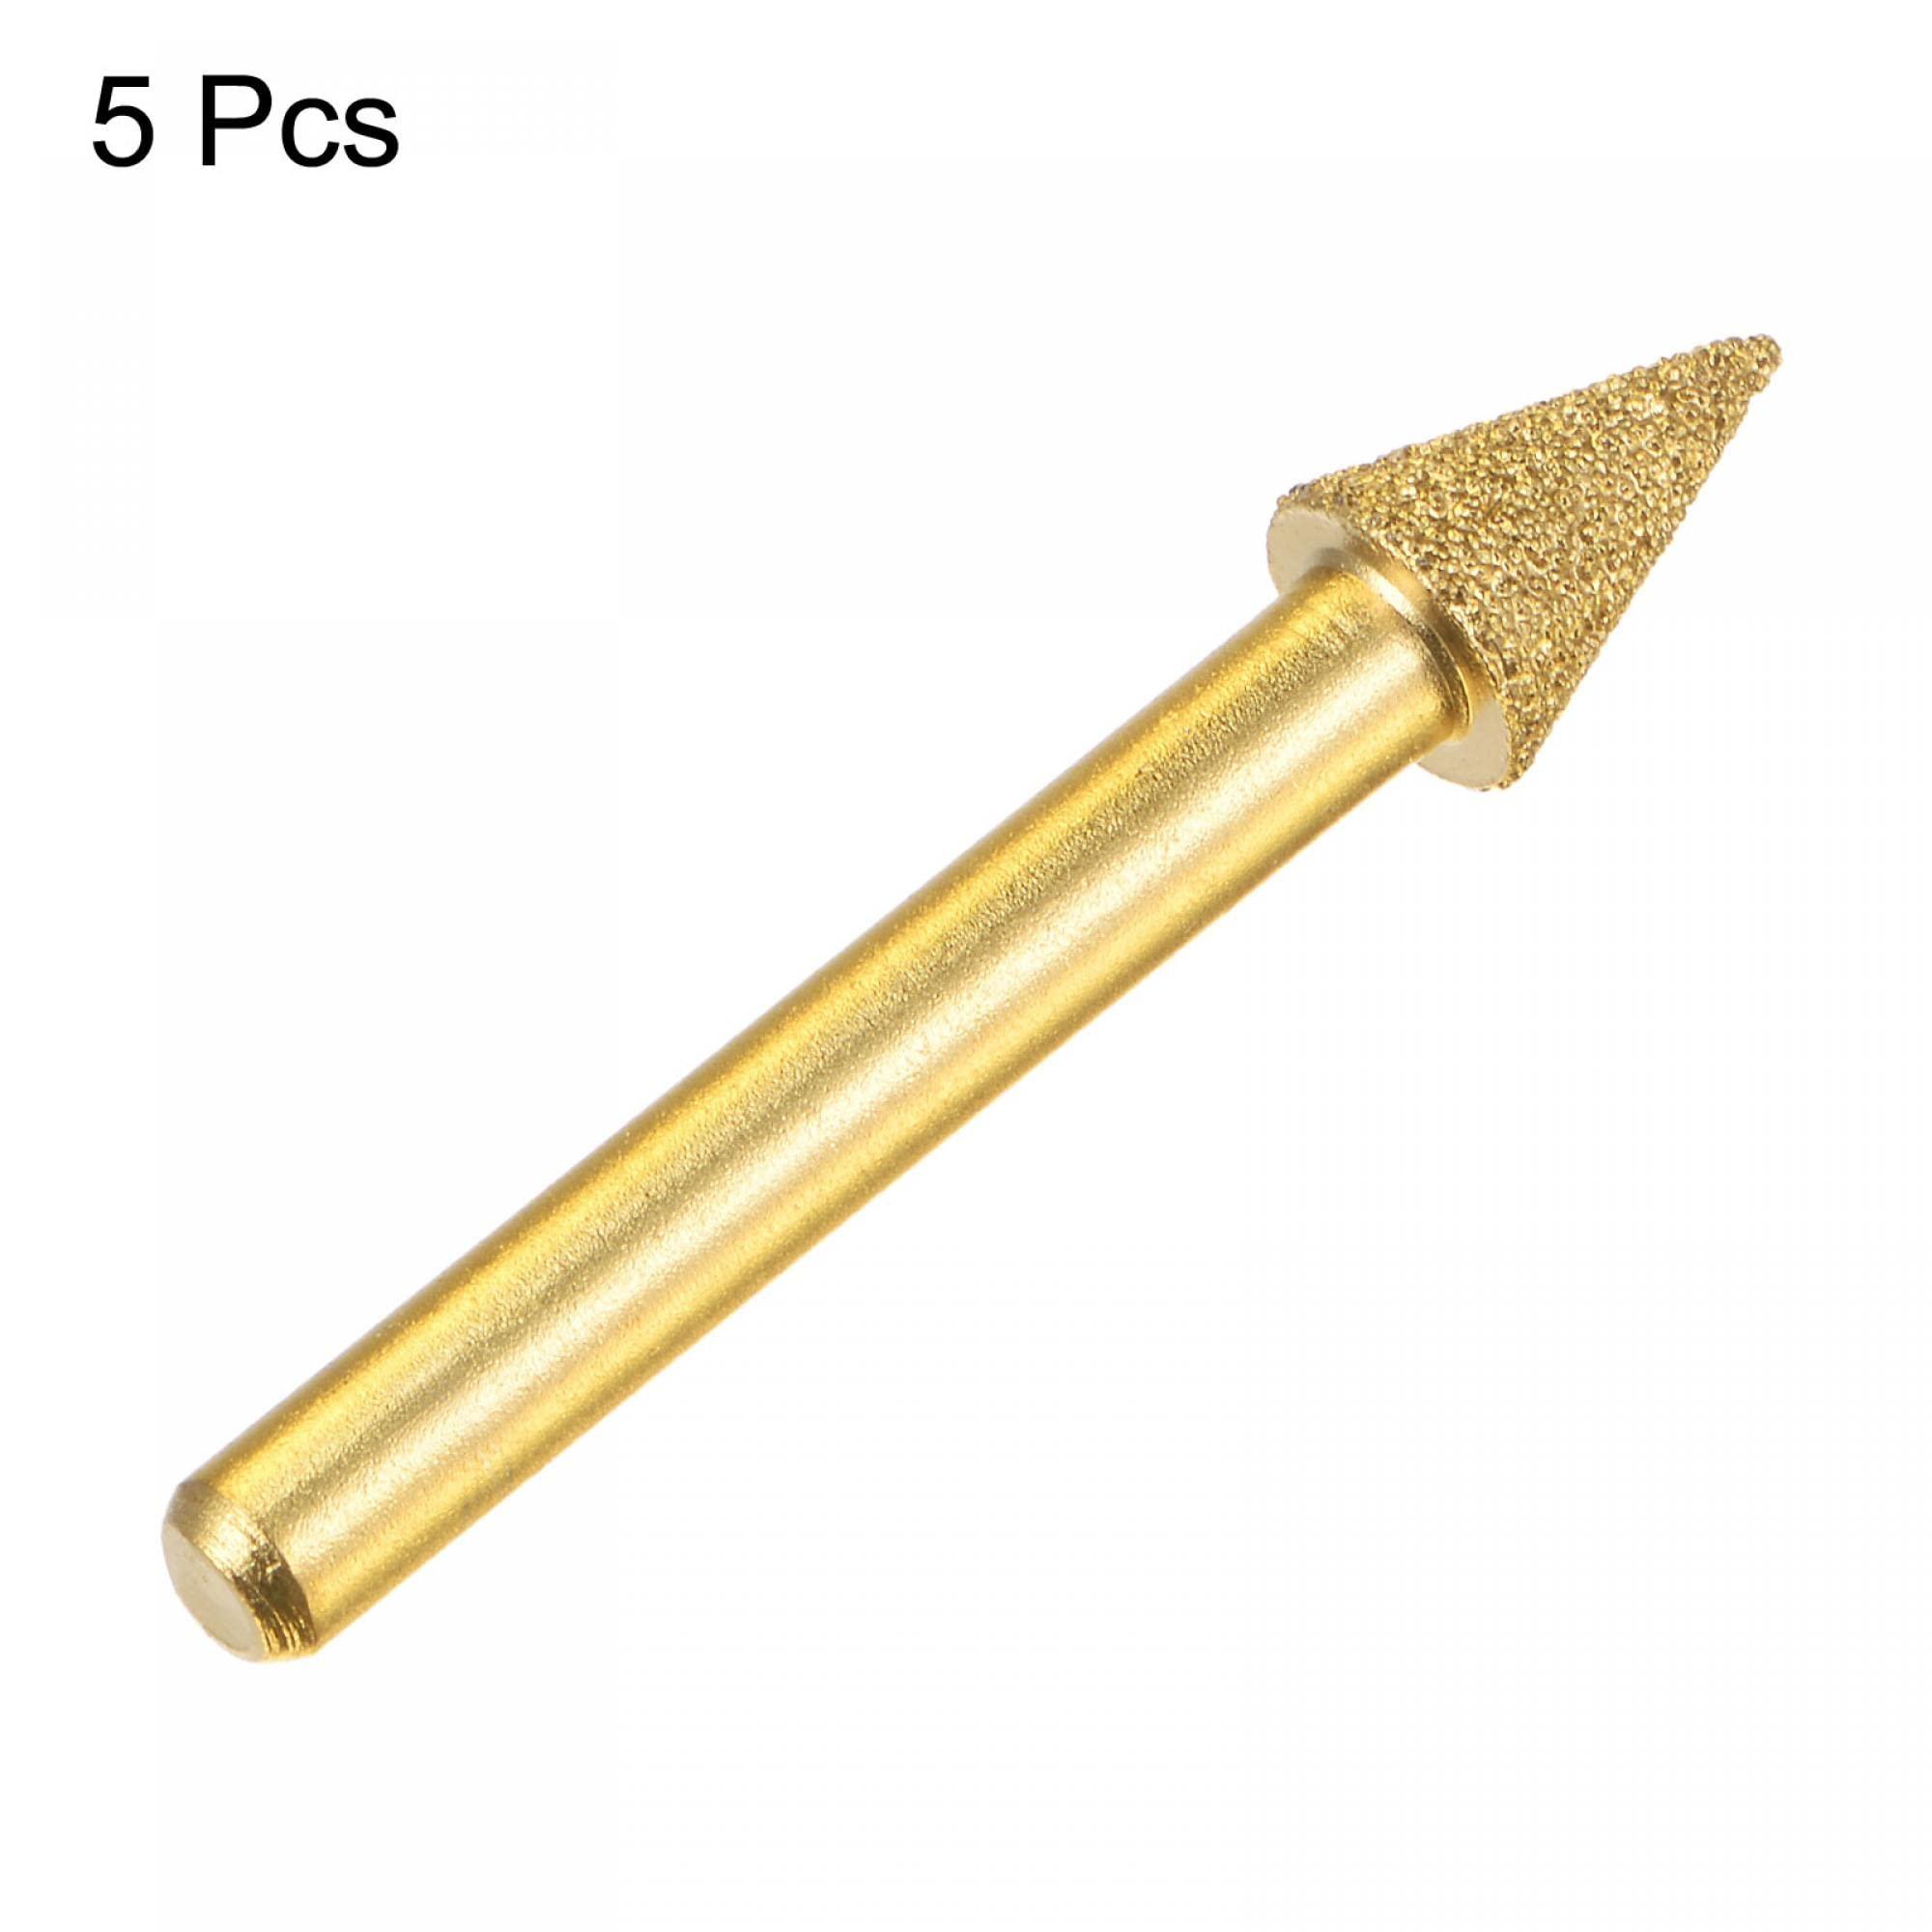 sourcing map 5Pcs Diamond Mounted Point 10mm Brazed Grinder Taper Head 6mm Shank Grinding Rotary Bit Marble Stone Carving Tool 3